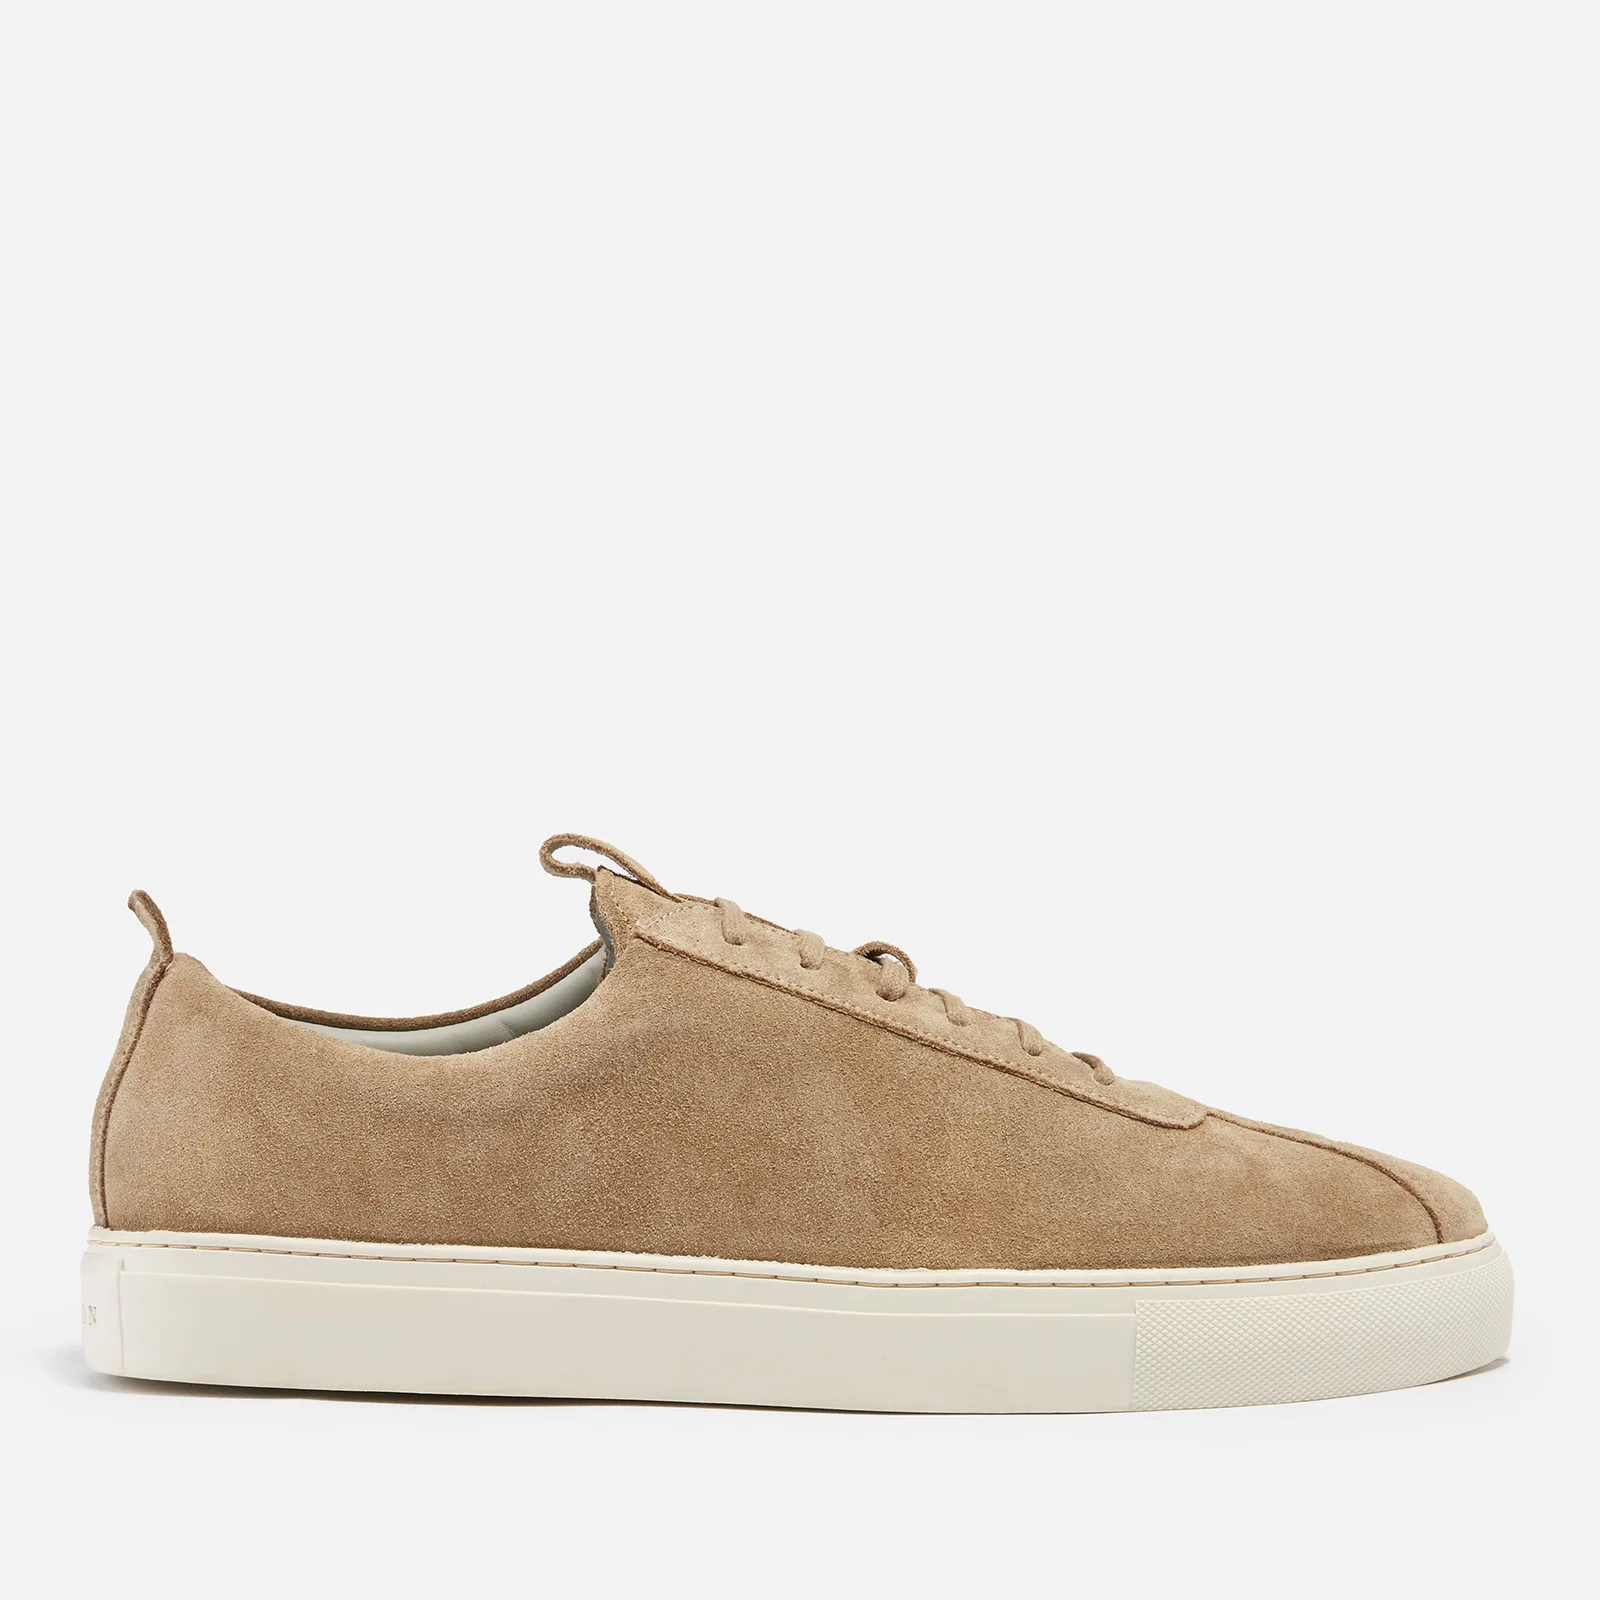 Grenson 1 Suede Trainers Image 1